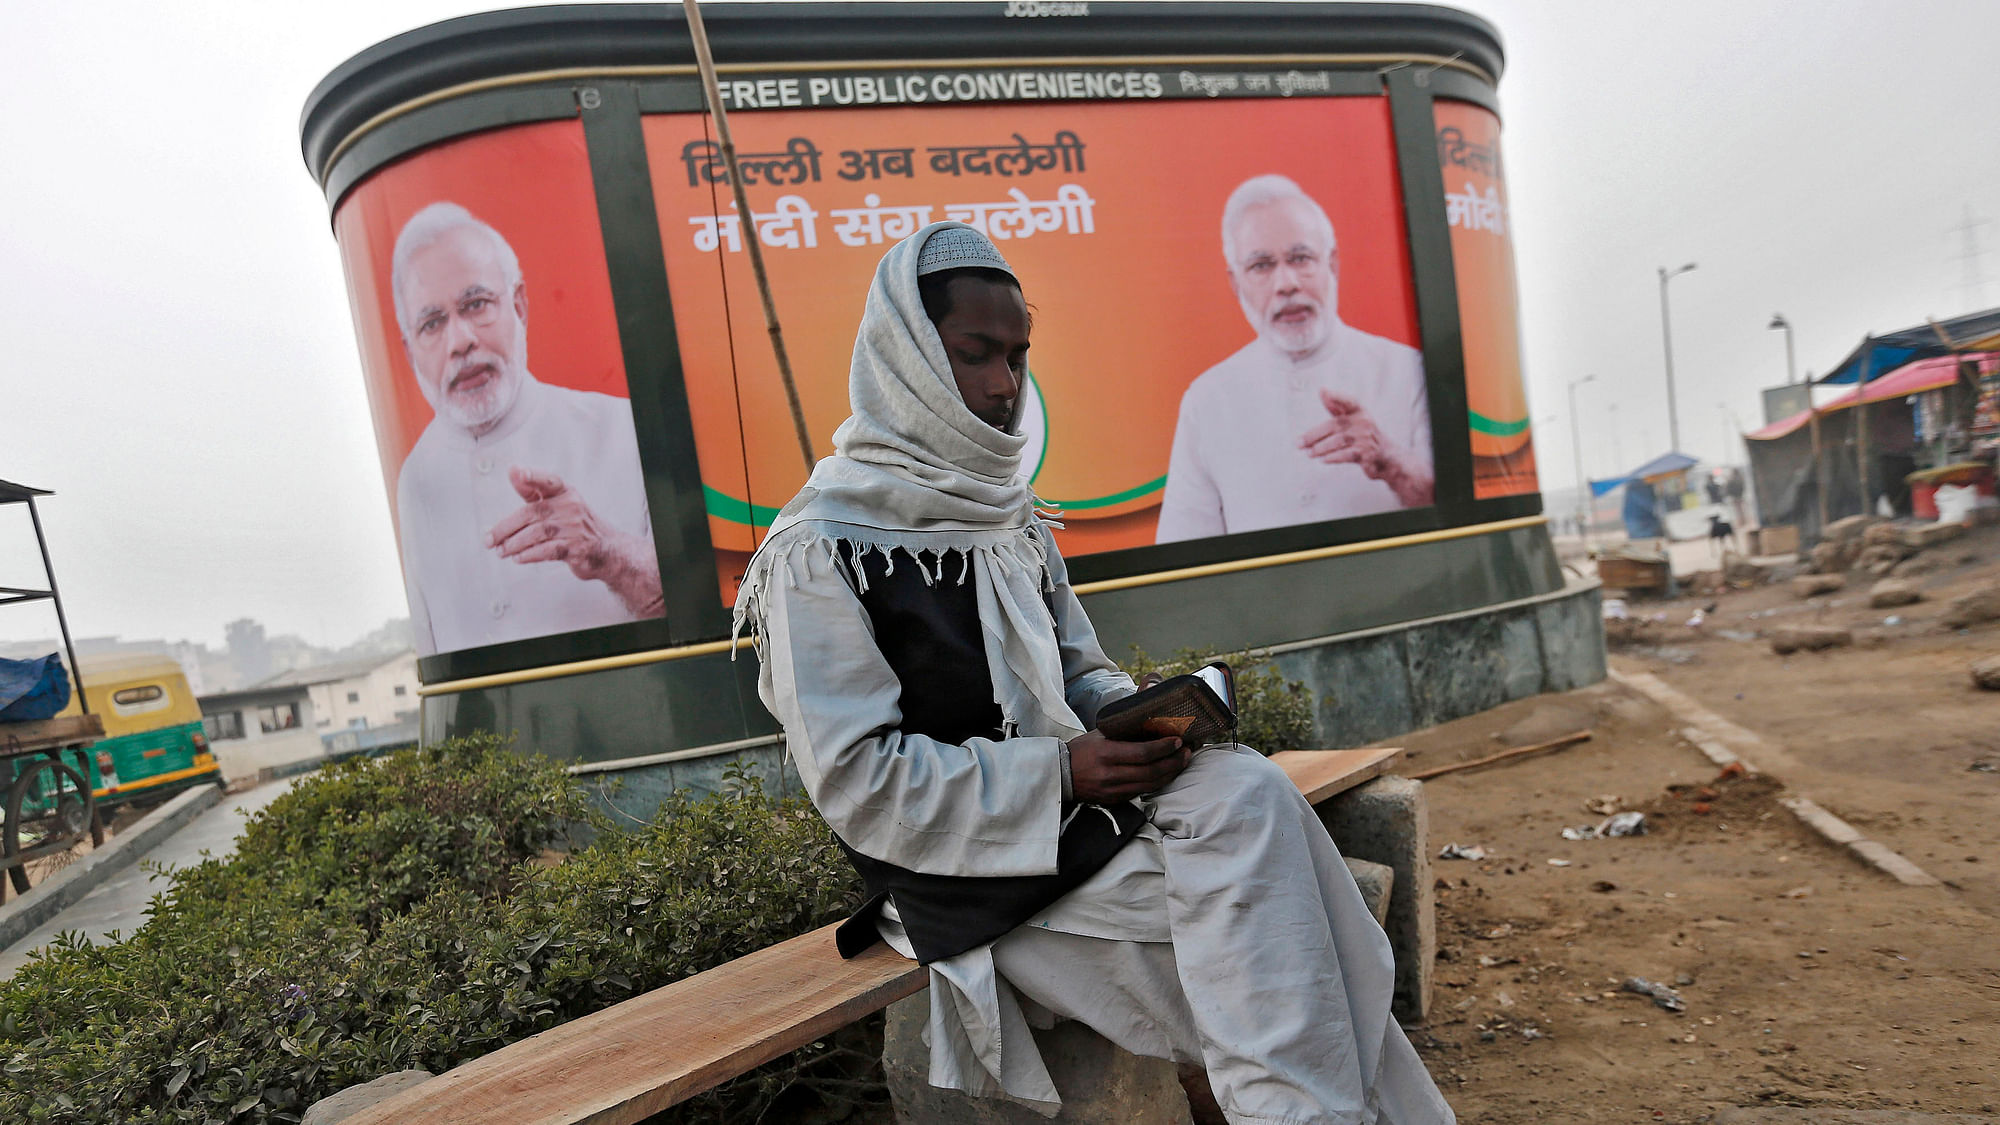 A Muslim man reads the Koran as he sits in front of a billboard featuring India’s Prime Minister Narendra Modi on a pavement along a road in New Delhi January 20, 2015. (Photo: Reuters)